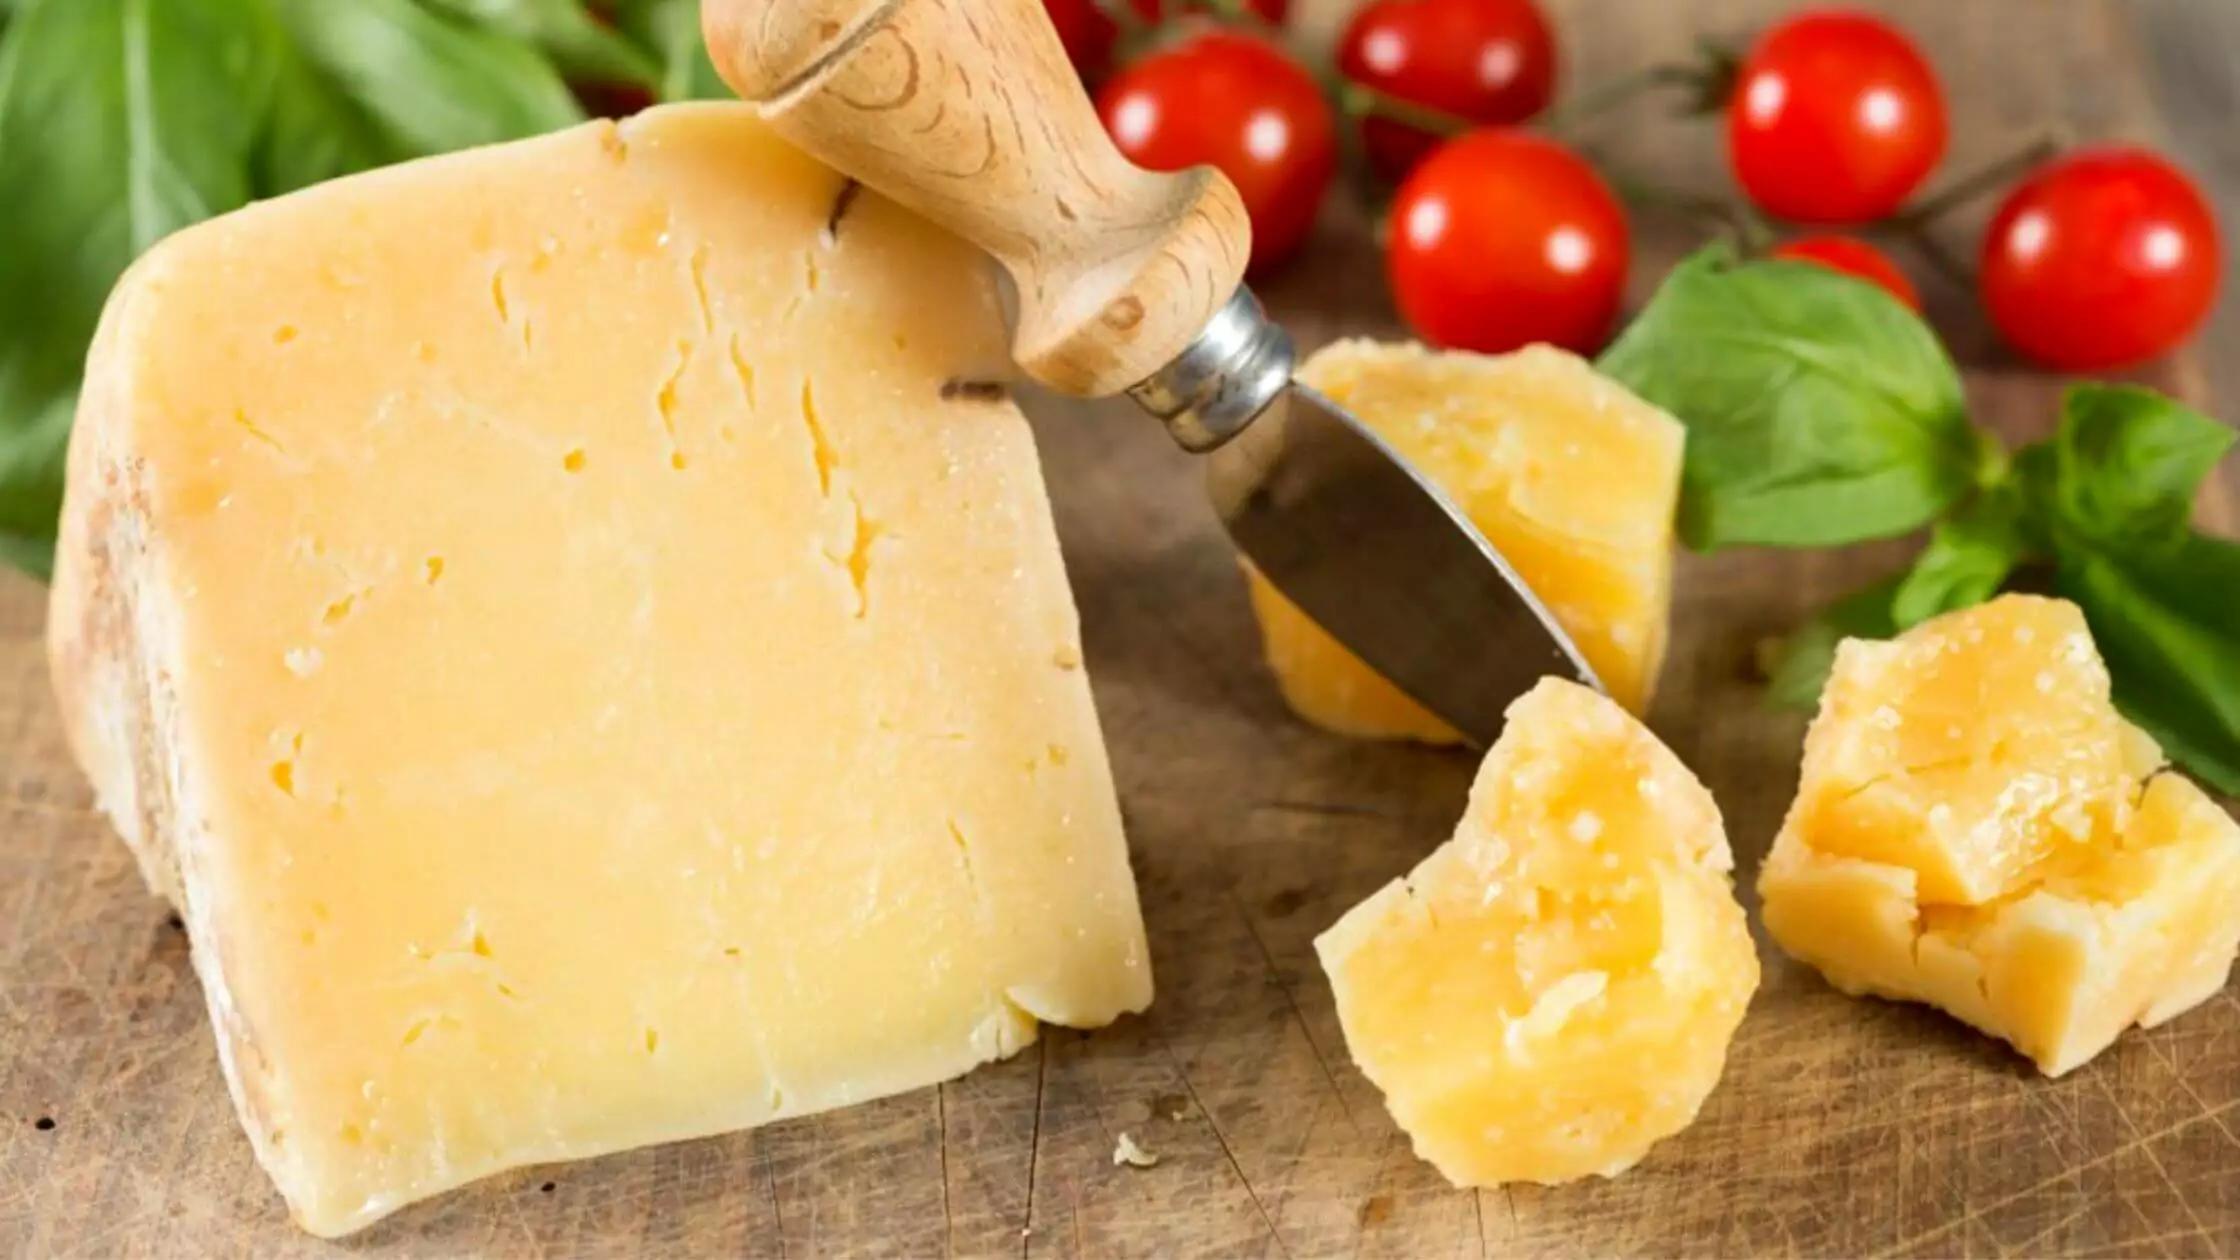 Imitation Cheese Contain Real Cheese